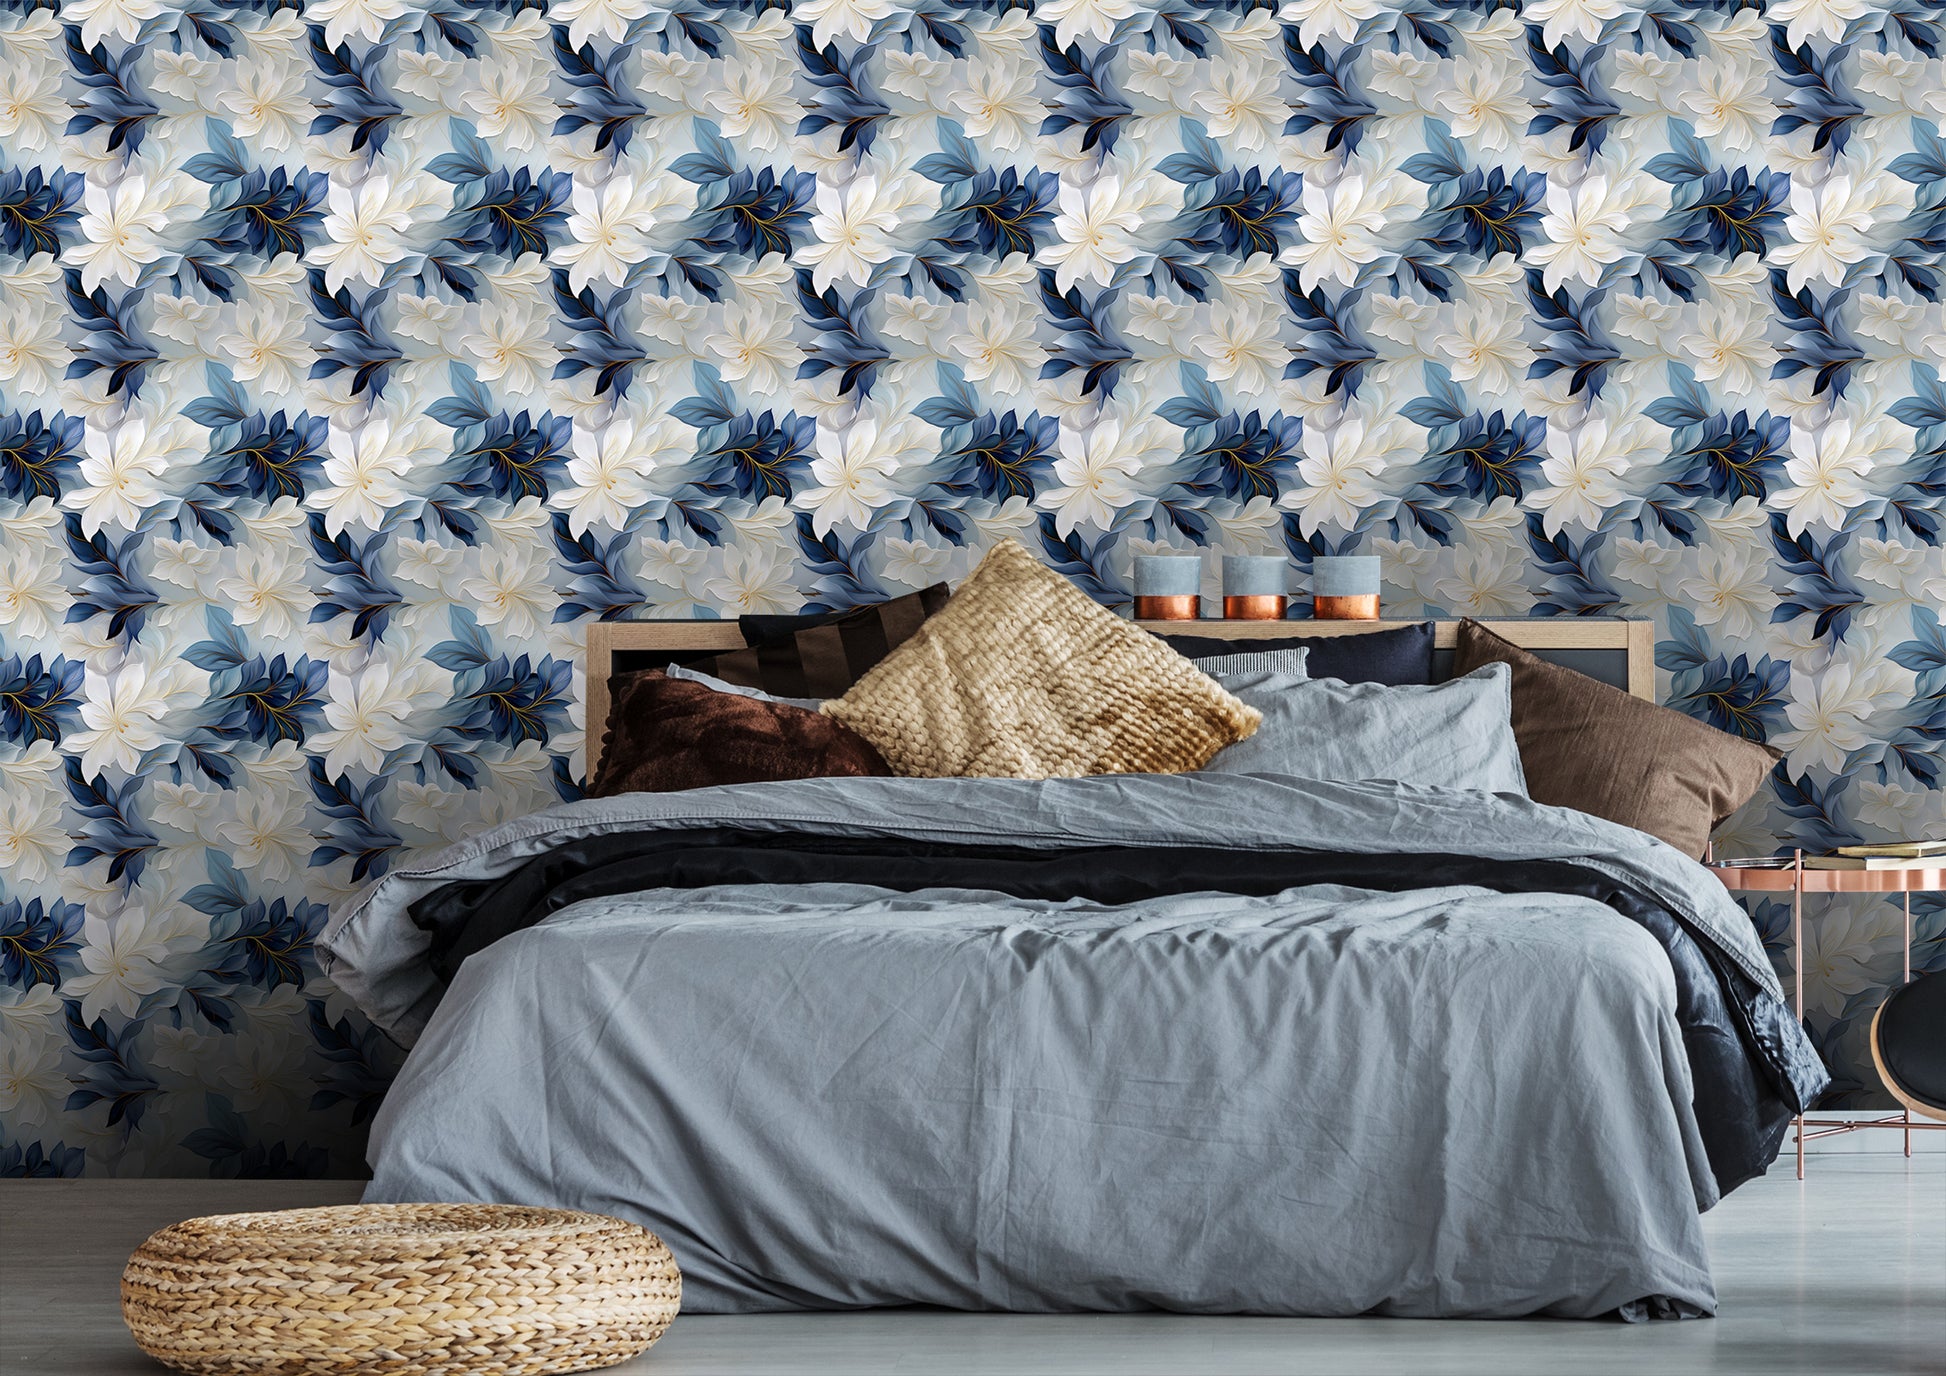 Bright and Cheerful Floral Pattern Wallpaper